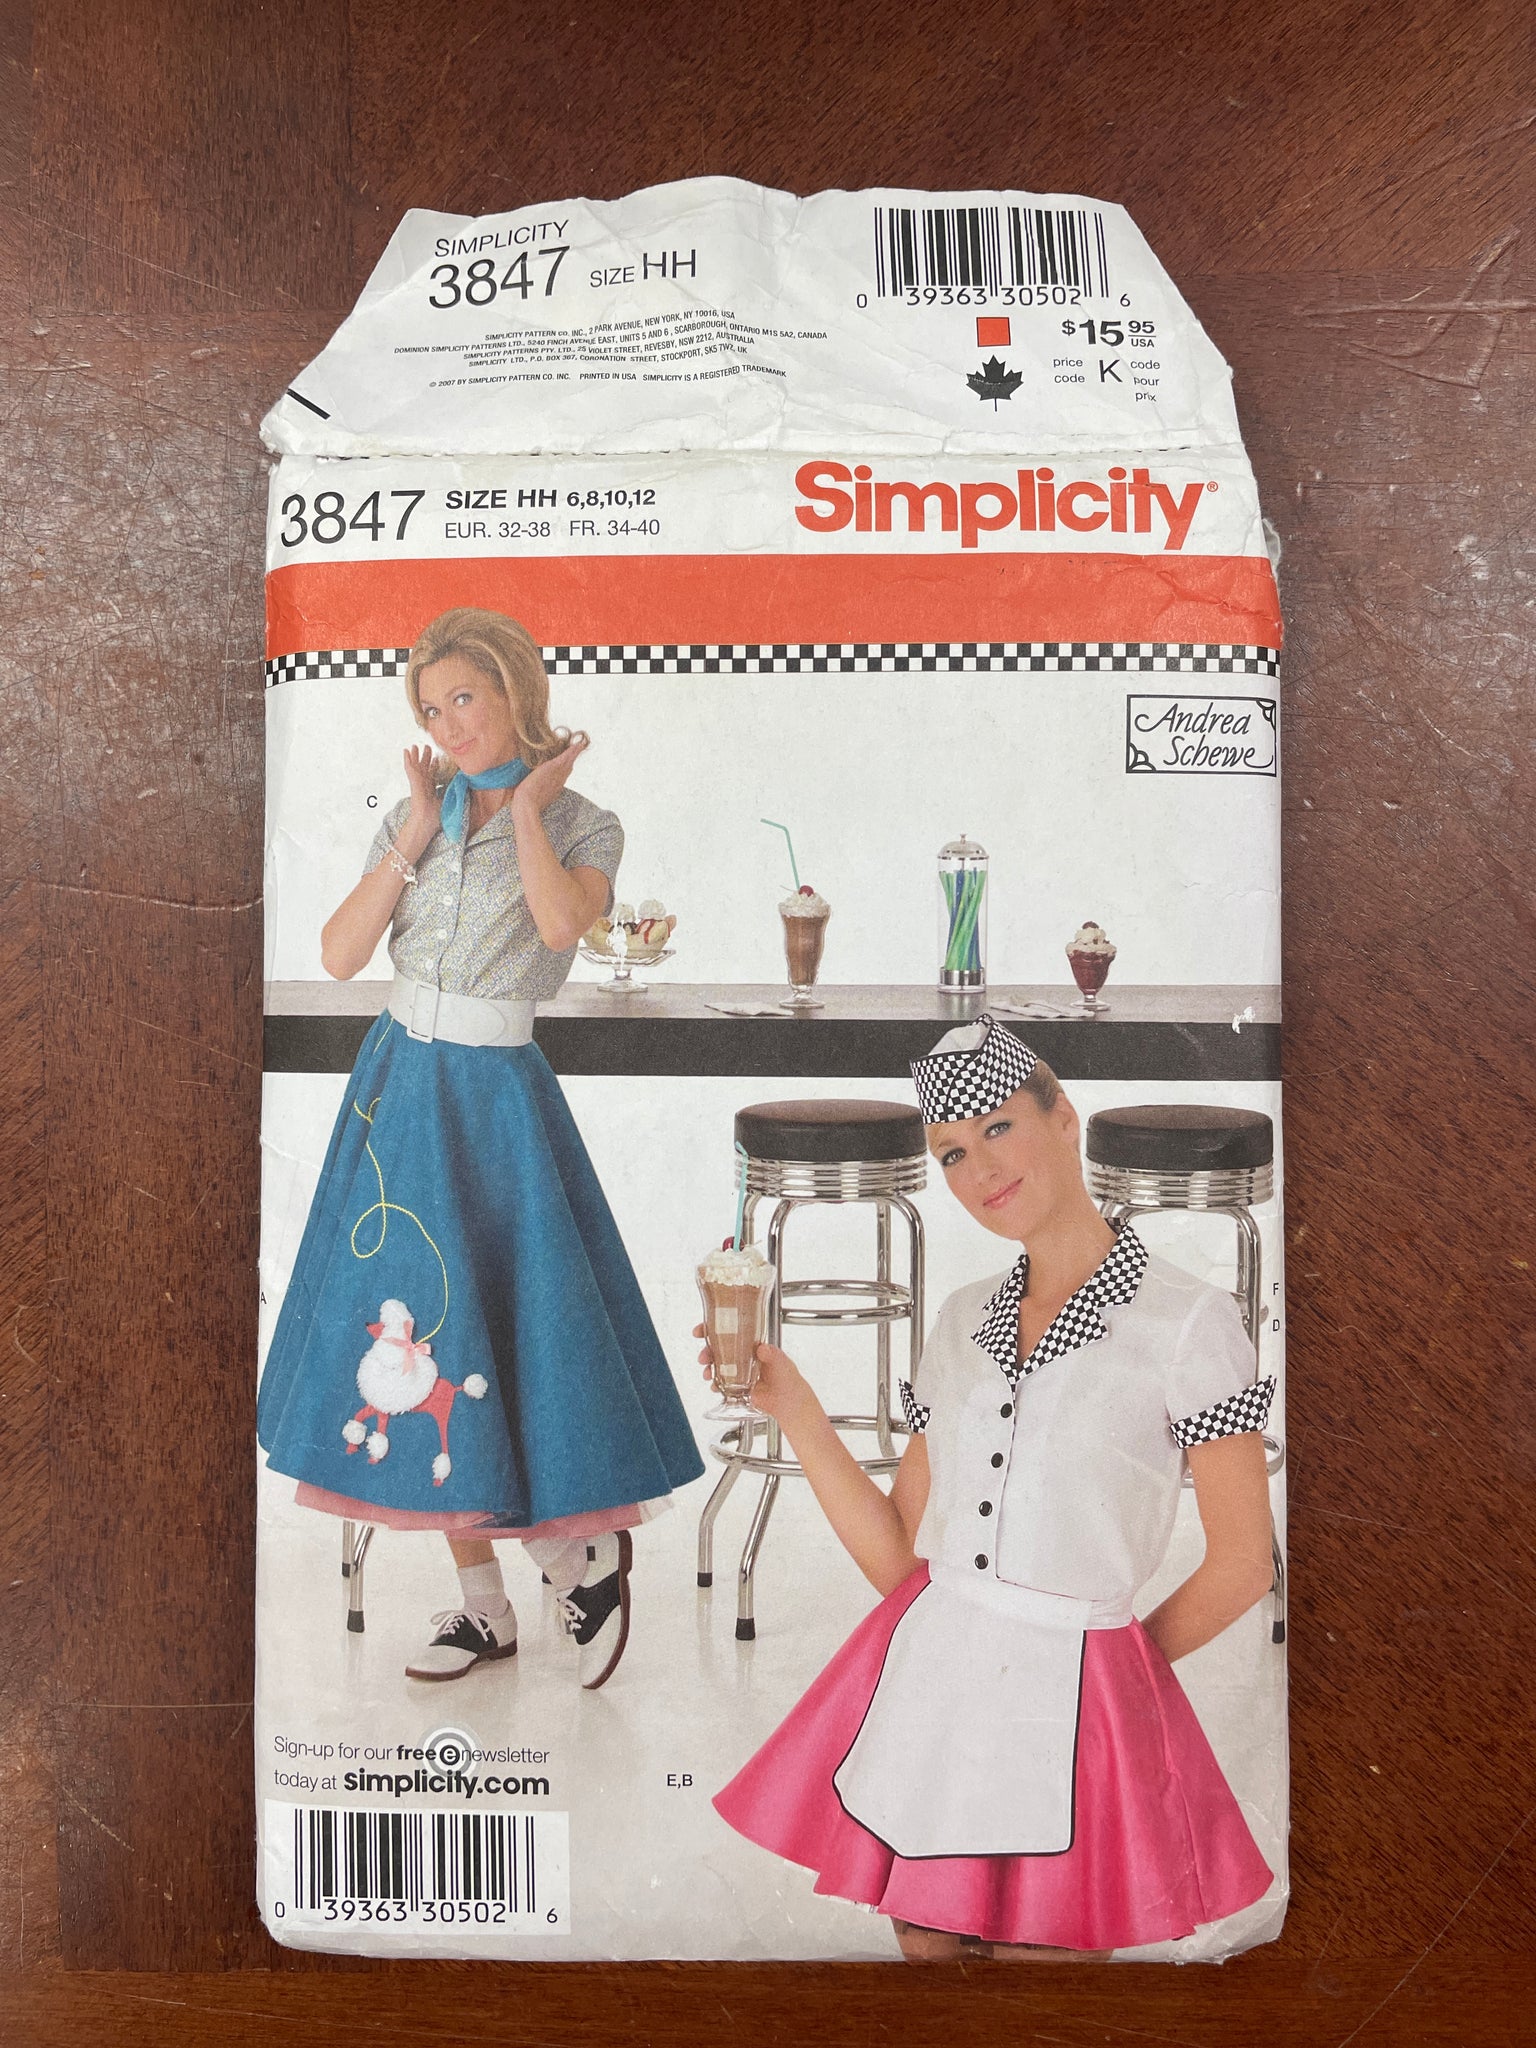 2007 Simplicity 3847 Pattern - Women's 1950's Styled Costumes